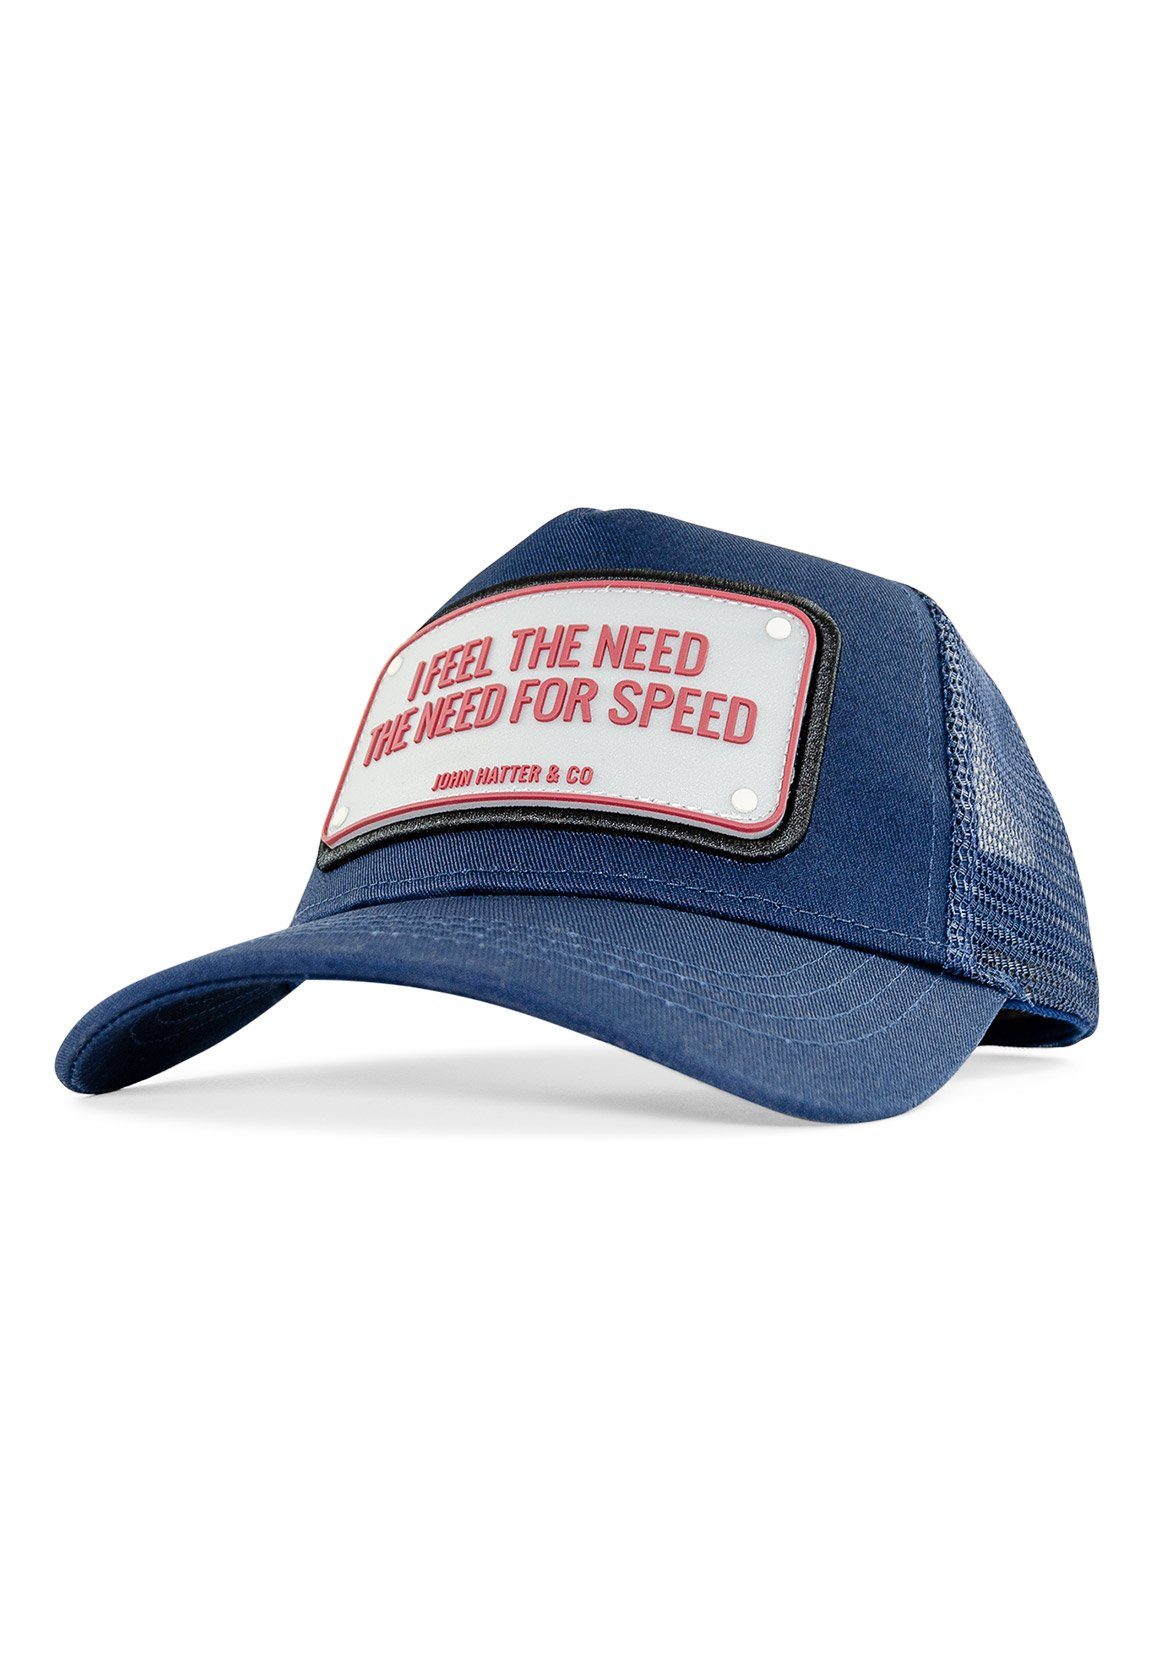 John Hatter & Co. Trucker Cap John Hatter & Co Trucker Cap NEED FOR SPEED Rubber Navy Blau